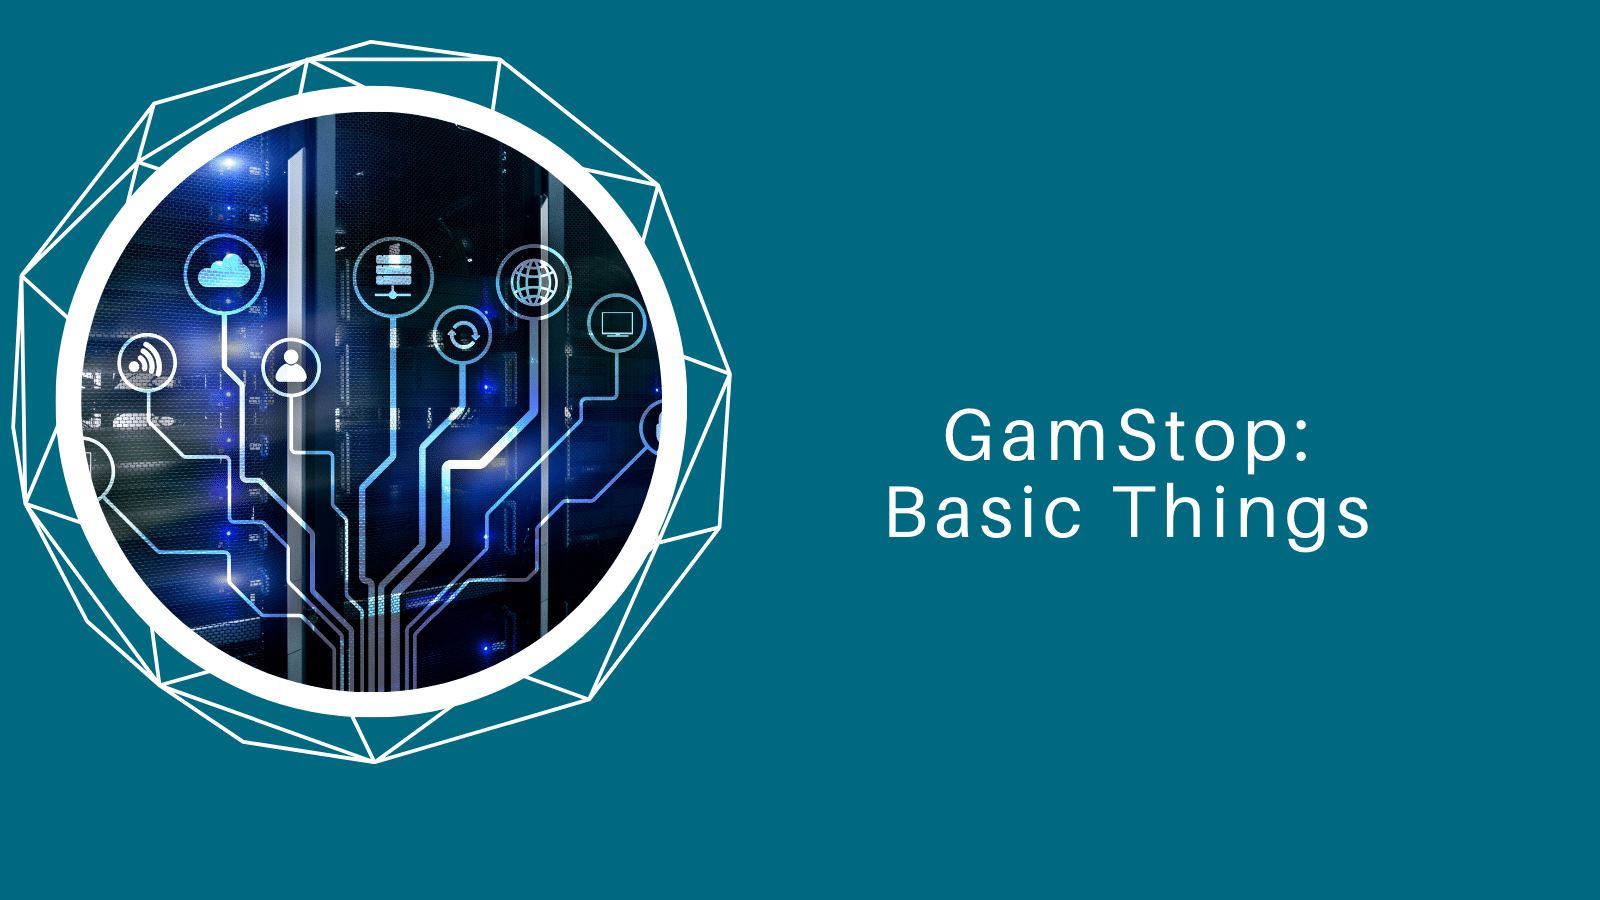 Warning: These 9 Mistakes Will Destroy Your overview of Gamstop